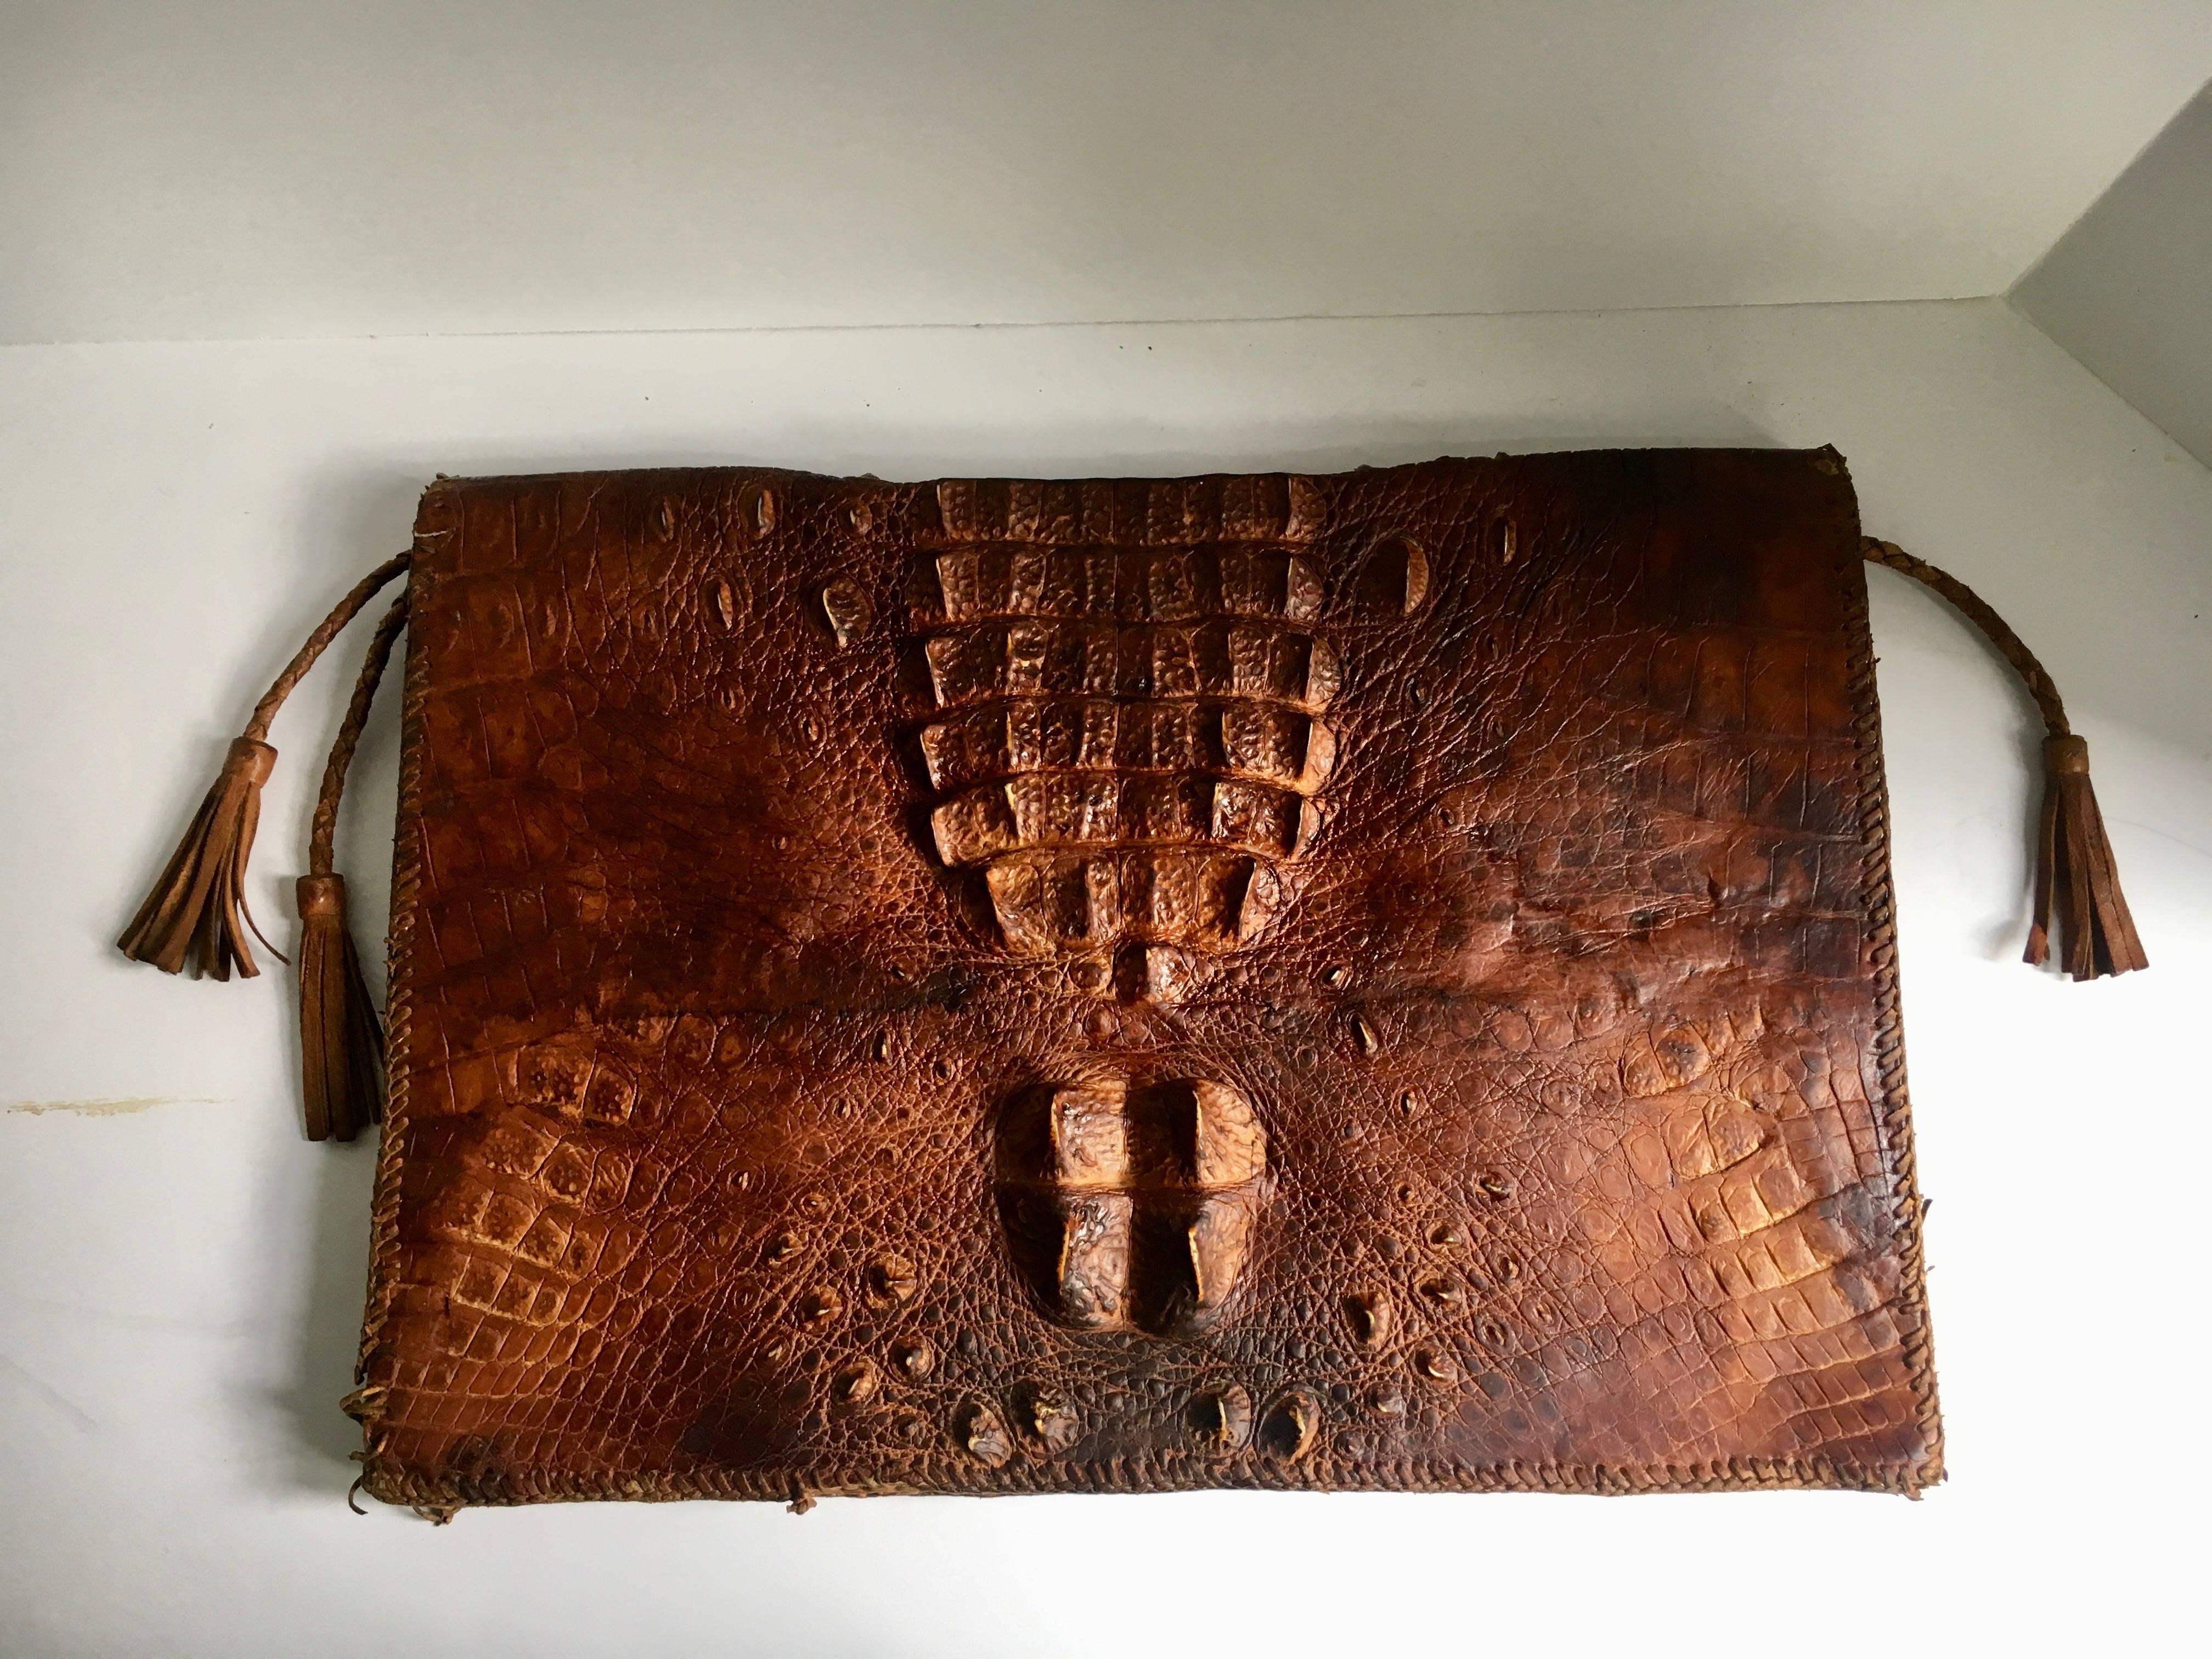 Crocodile attache portfolio with inside zipper pocket - A fabulous vintage crocodile portfolio / attache from Mexico - great for carrying everything from important papers to sketches and daily information. A very handsome piece for any business man